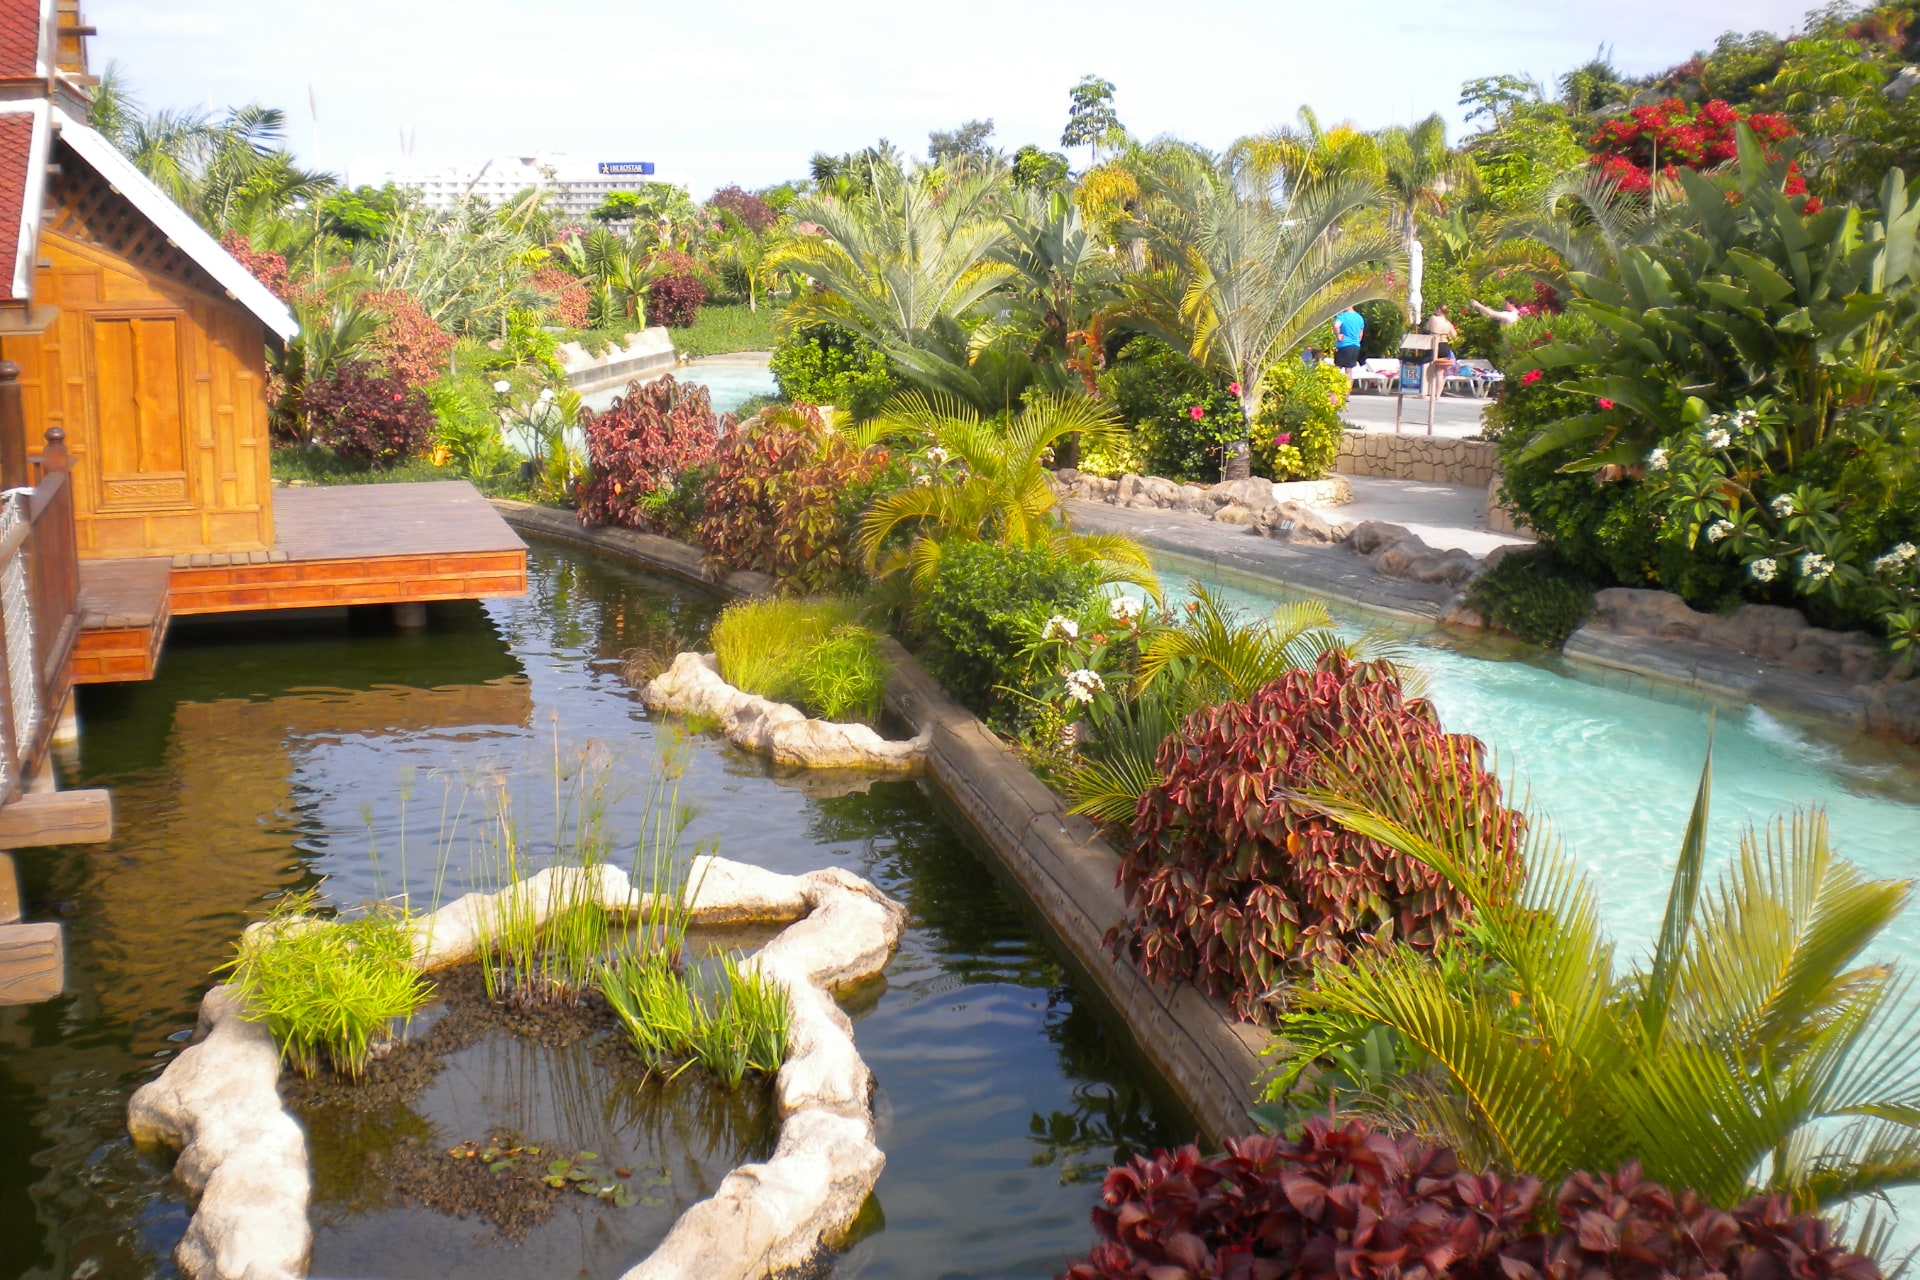 Beautiful decorative plants adorning the landscape at Siam Park, Tenerife, enhancing its natural beauty